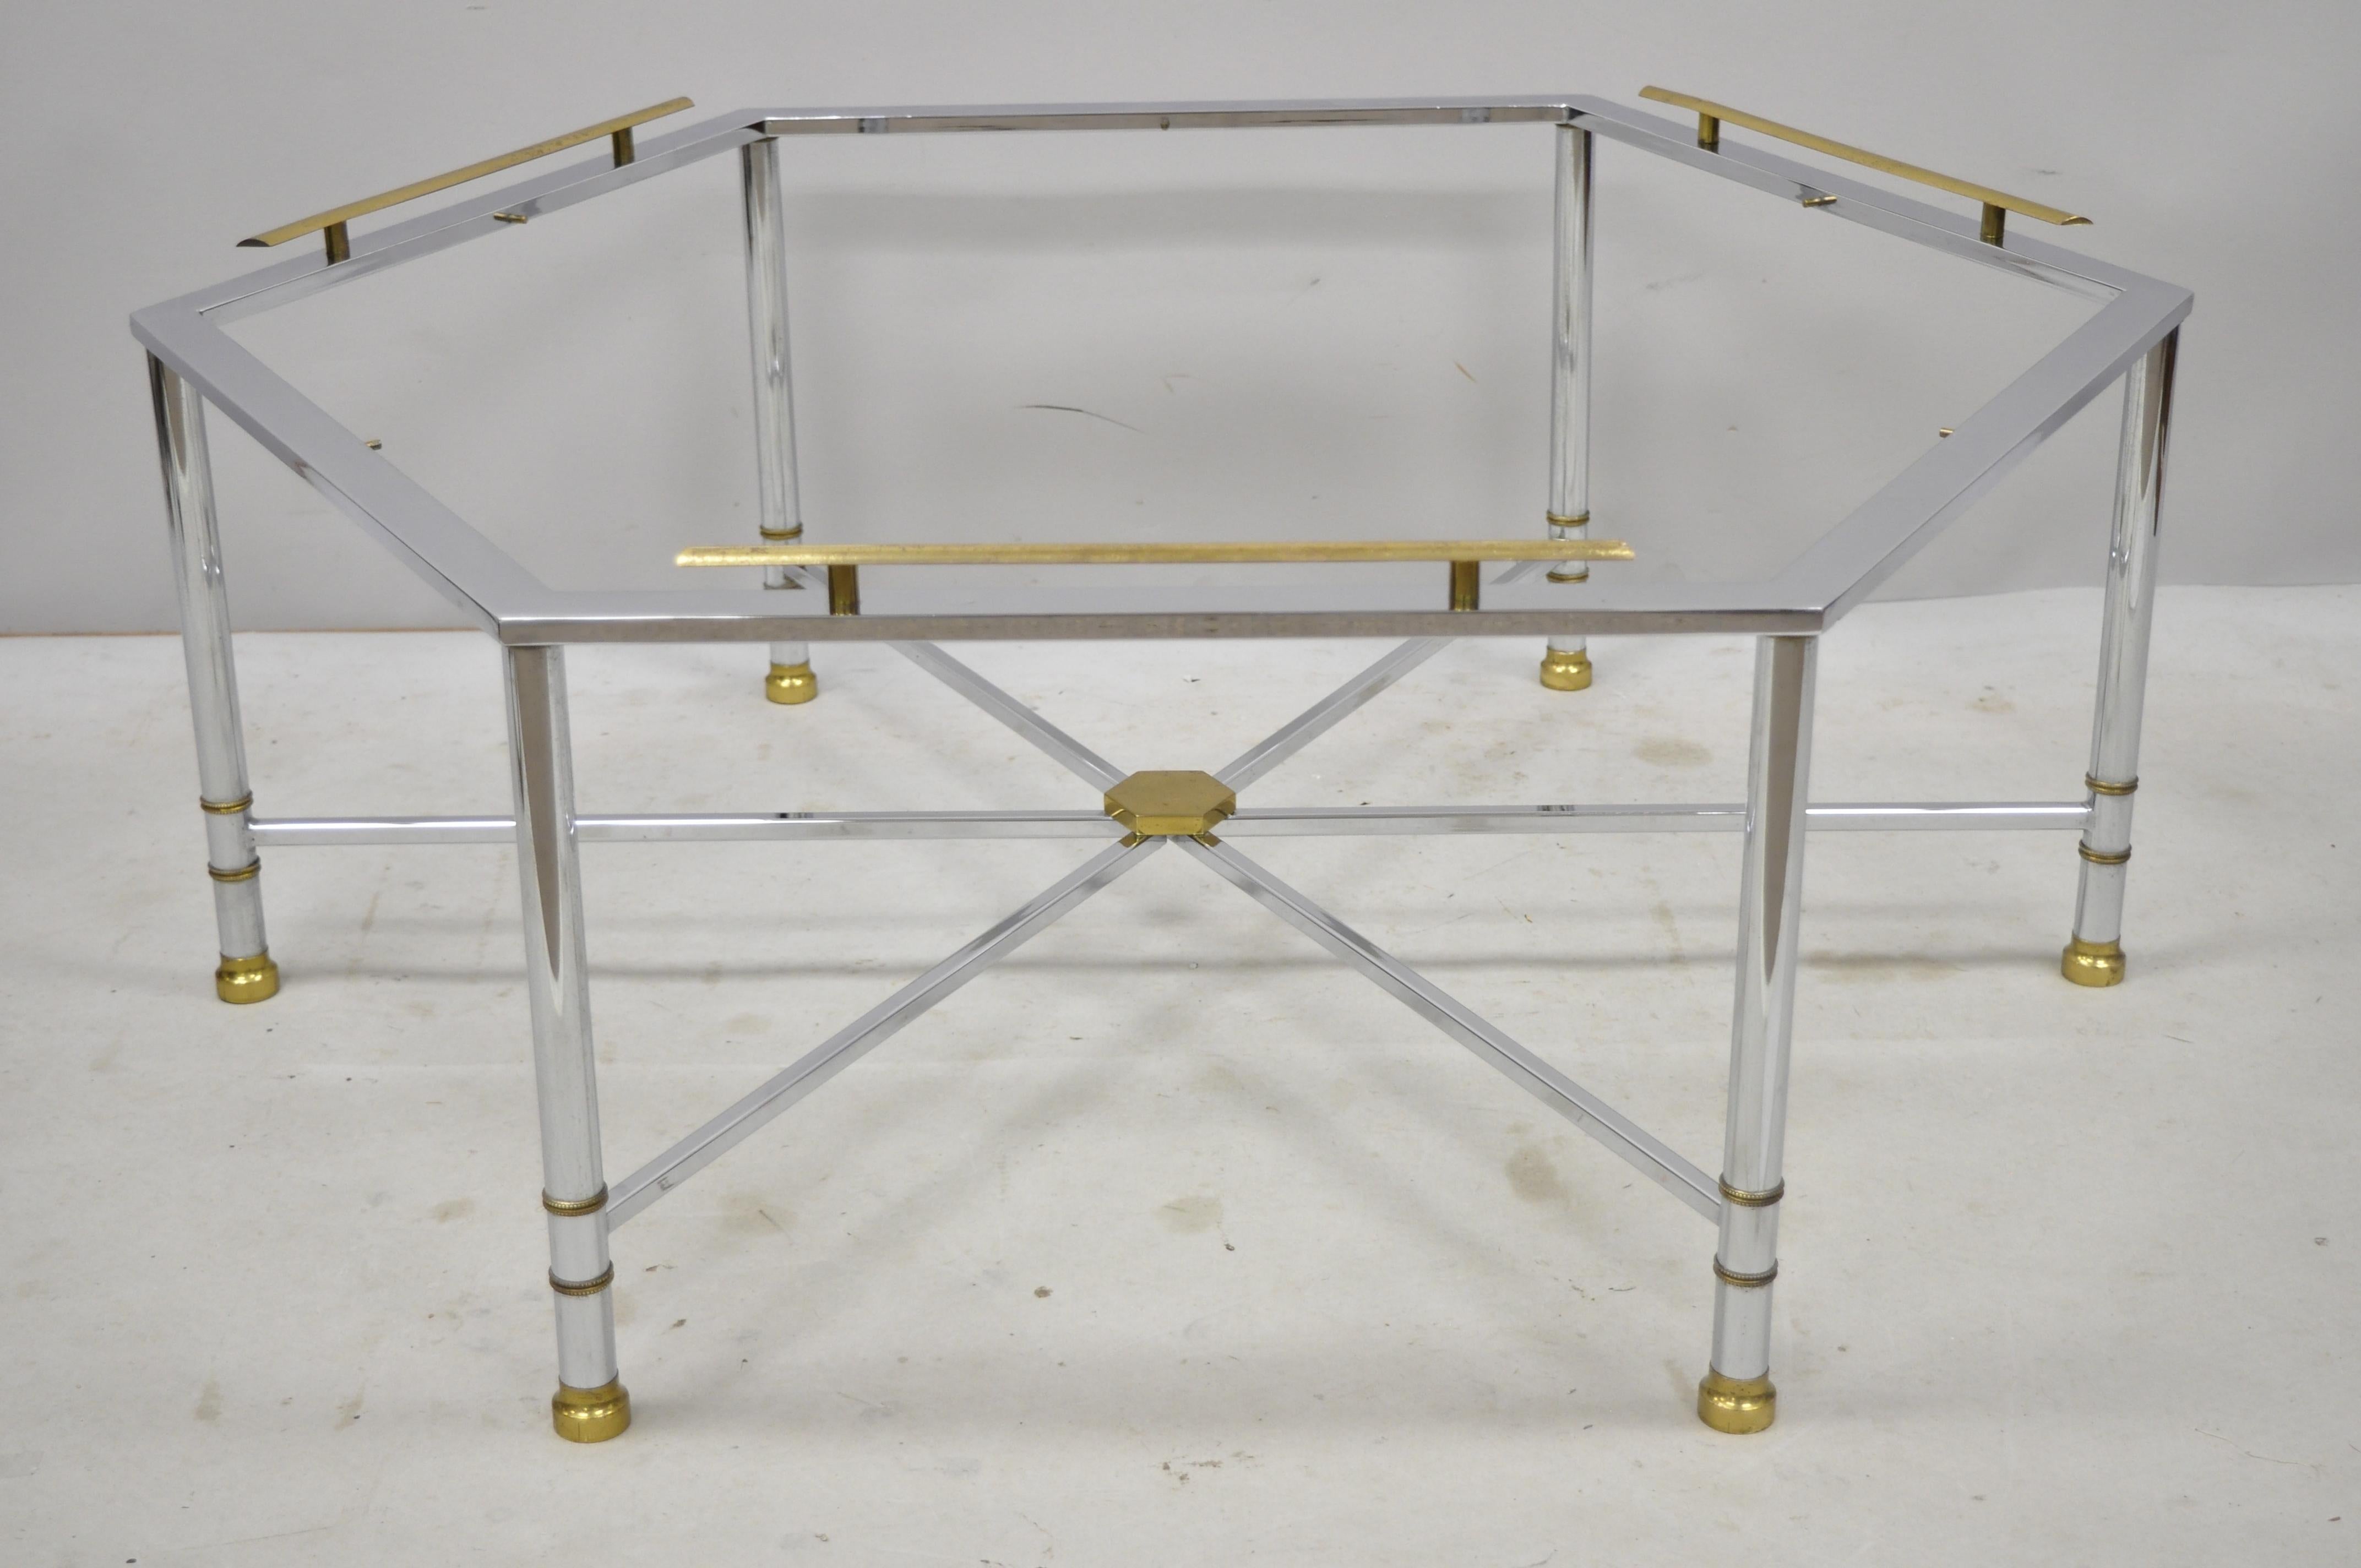 Chrome and brass Maison Jansen style Hexagon Hollywood Regency Directoire coffee table. Item includes solid brass accents, polished chrome frame, stretcher base, brass 